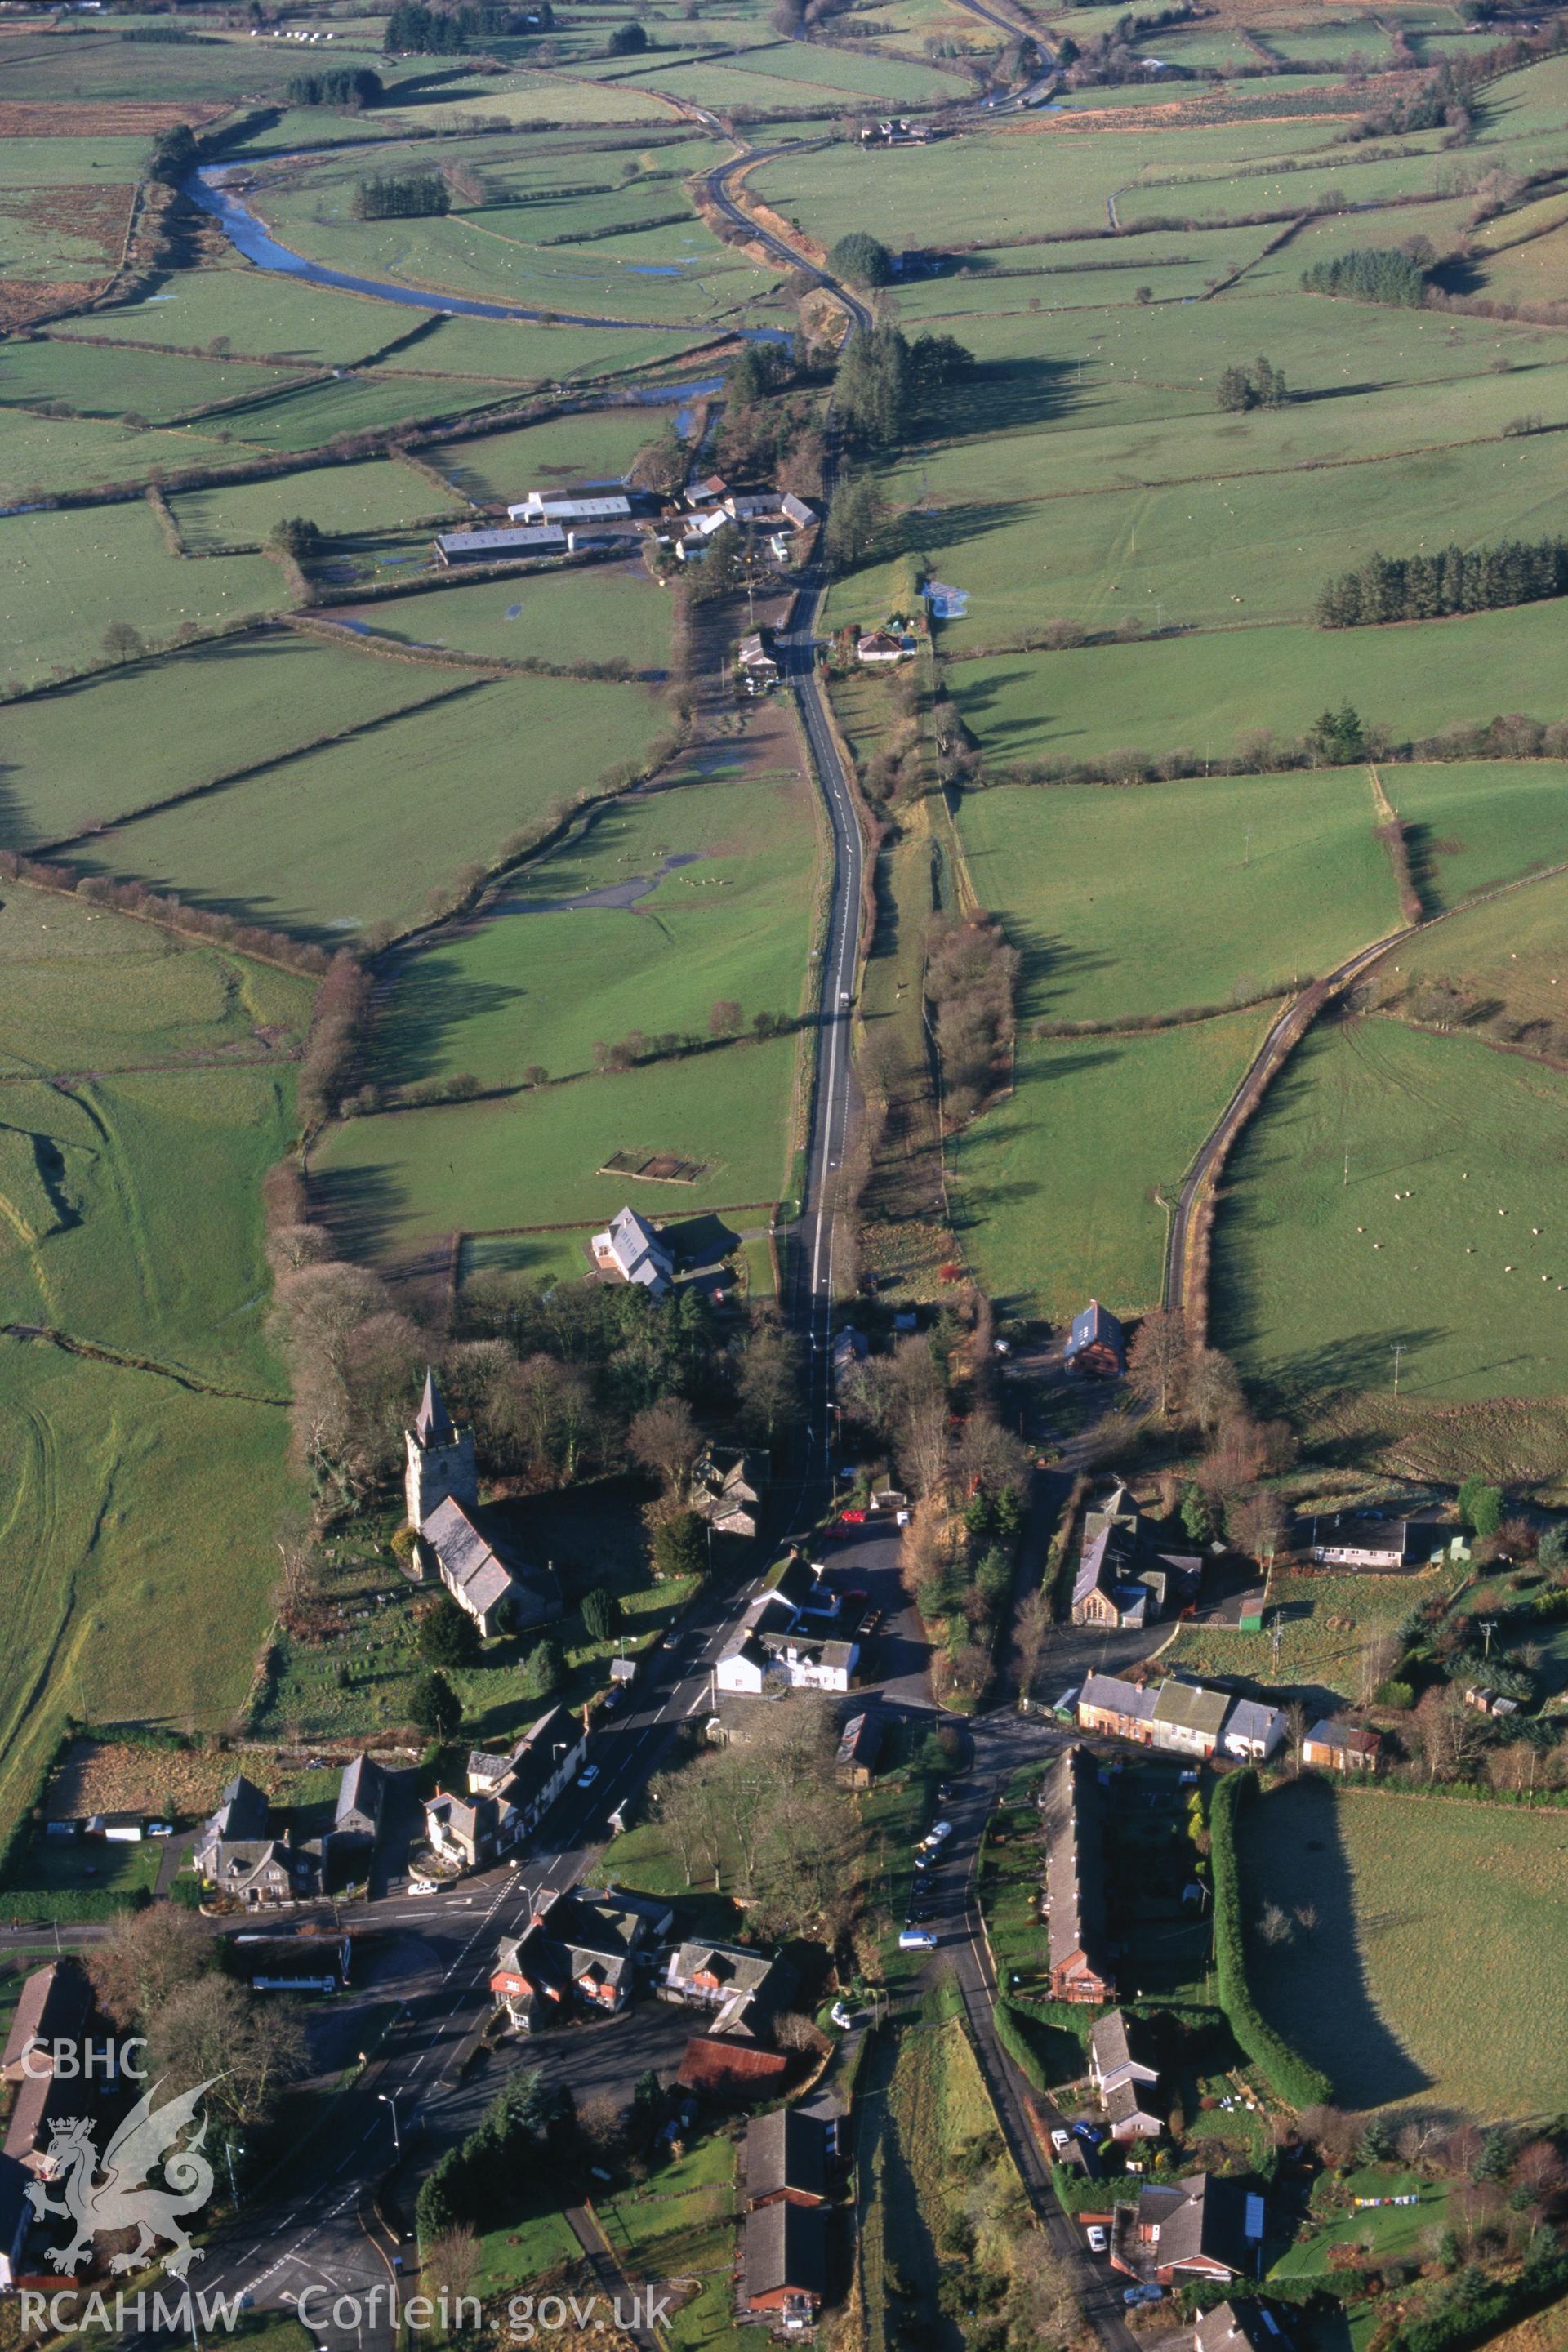 Slide of RCAHMW colour oblique aerial photograph of Llangurig, taken by C.R. Musson, 20/12/1998.